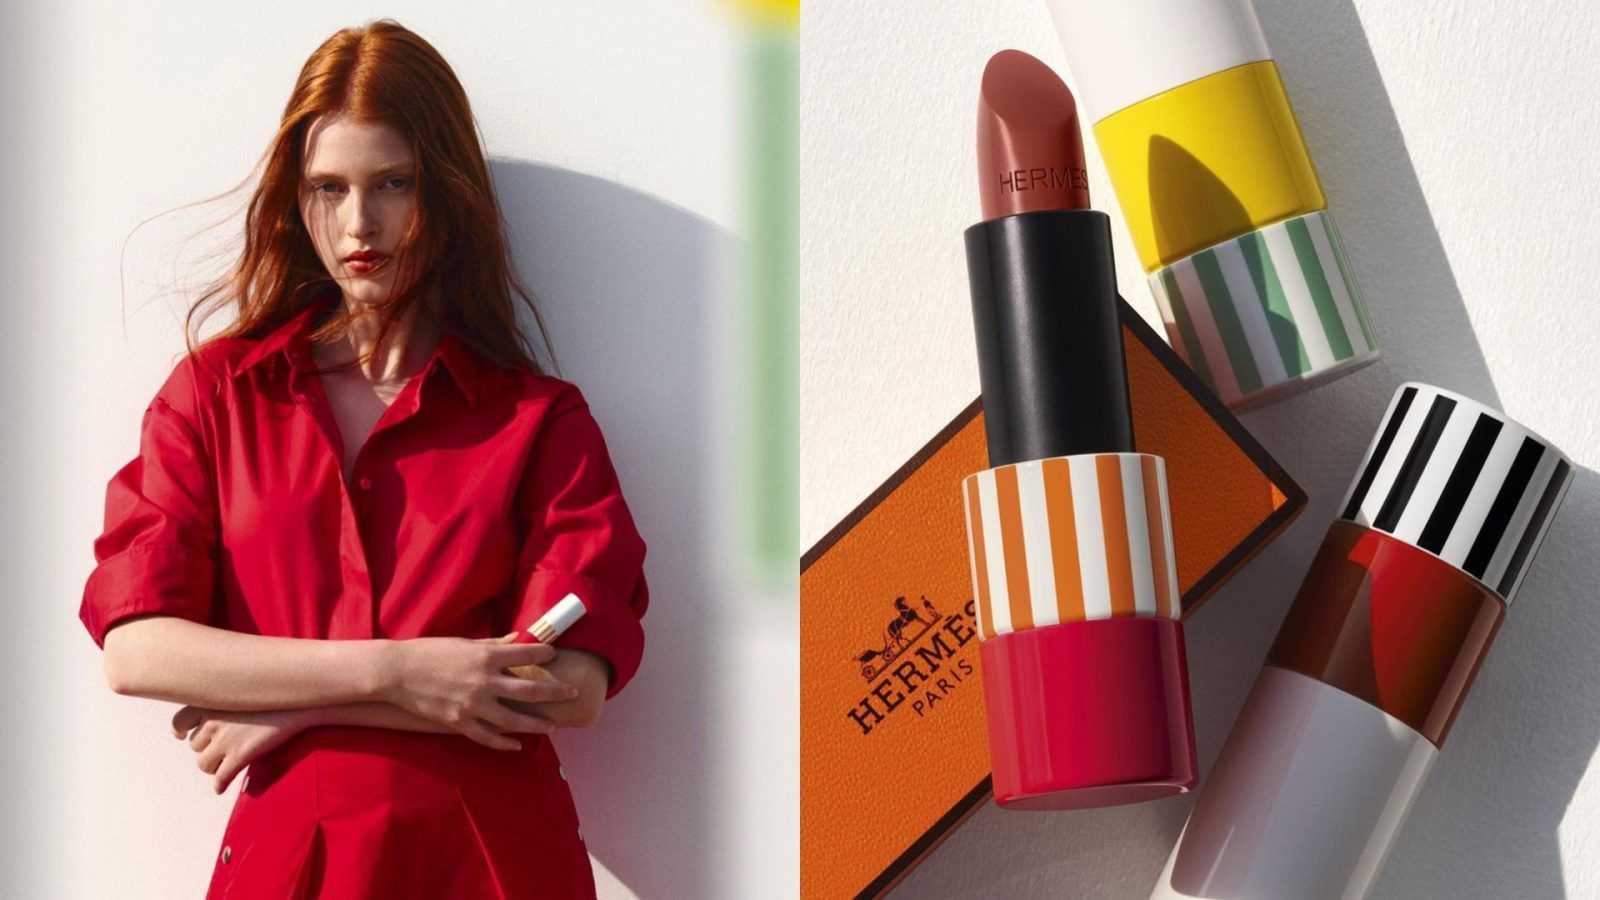 Hermes Rouge Hermes Shiny Lipstick, Limited Edition - Brun Yachting